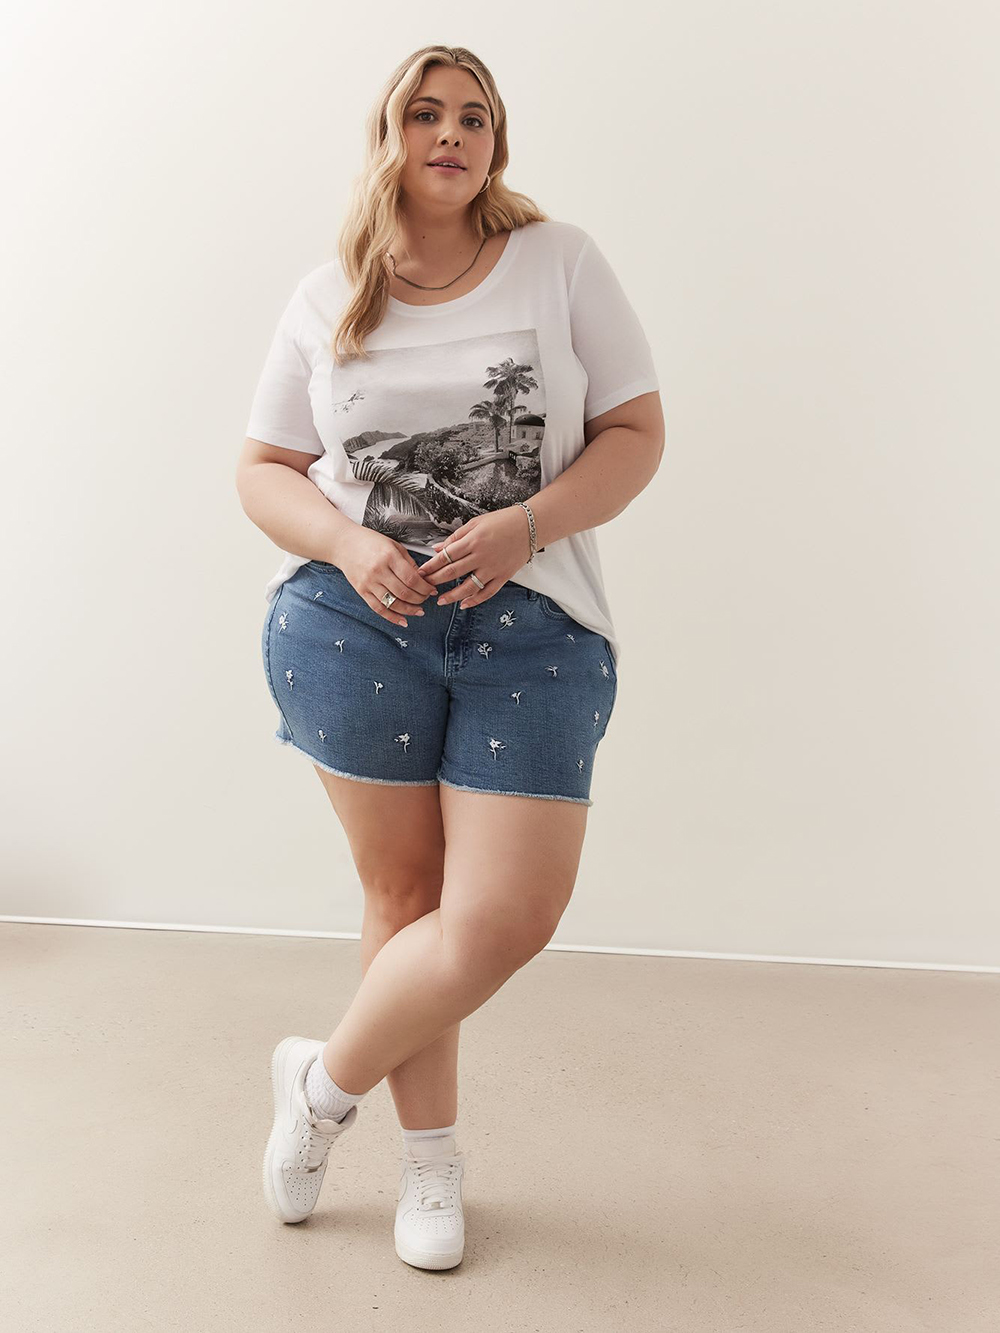 A model wearing embroidered floral denim shorts from Penningtons.